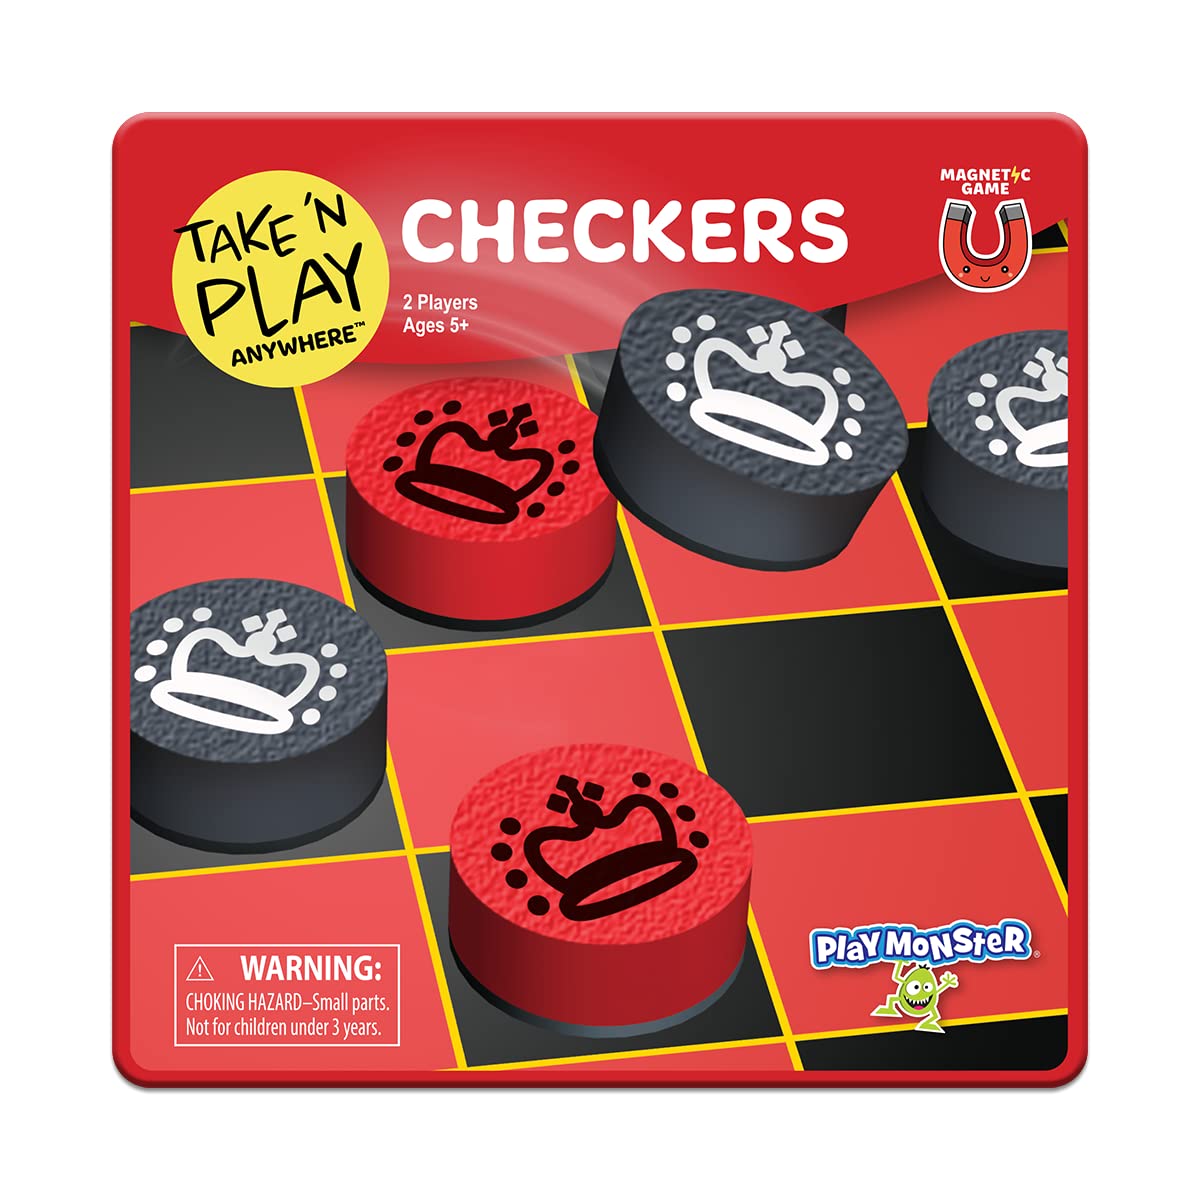 Take 'N Play Anywhere — Checkers — Magnetic Travel Game — Fun on The Go! — for Ages 4+